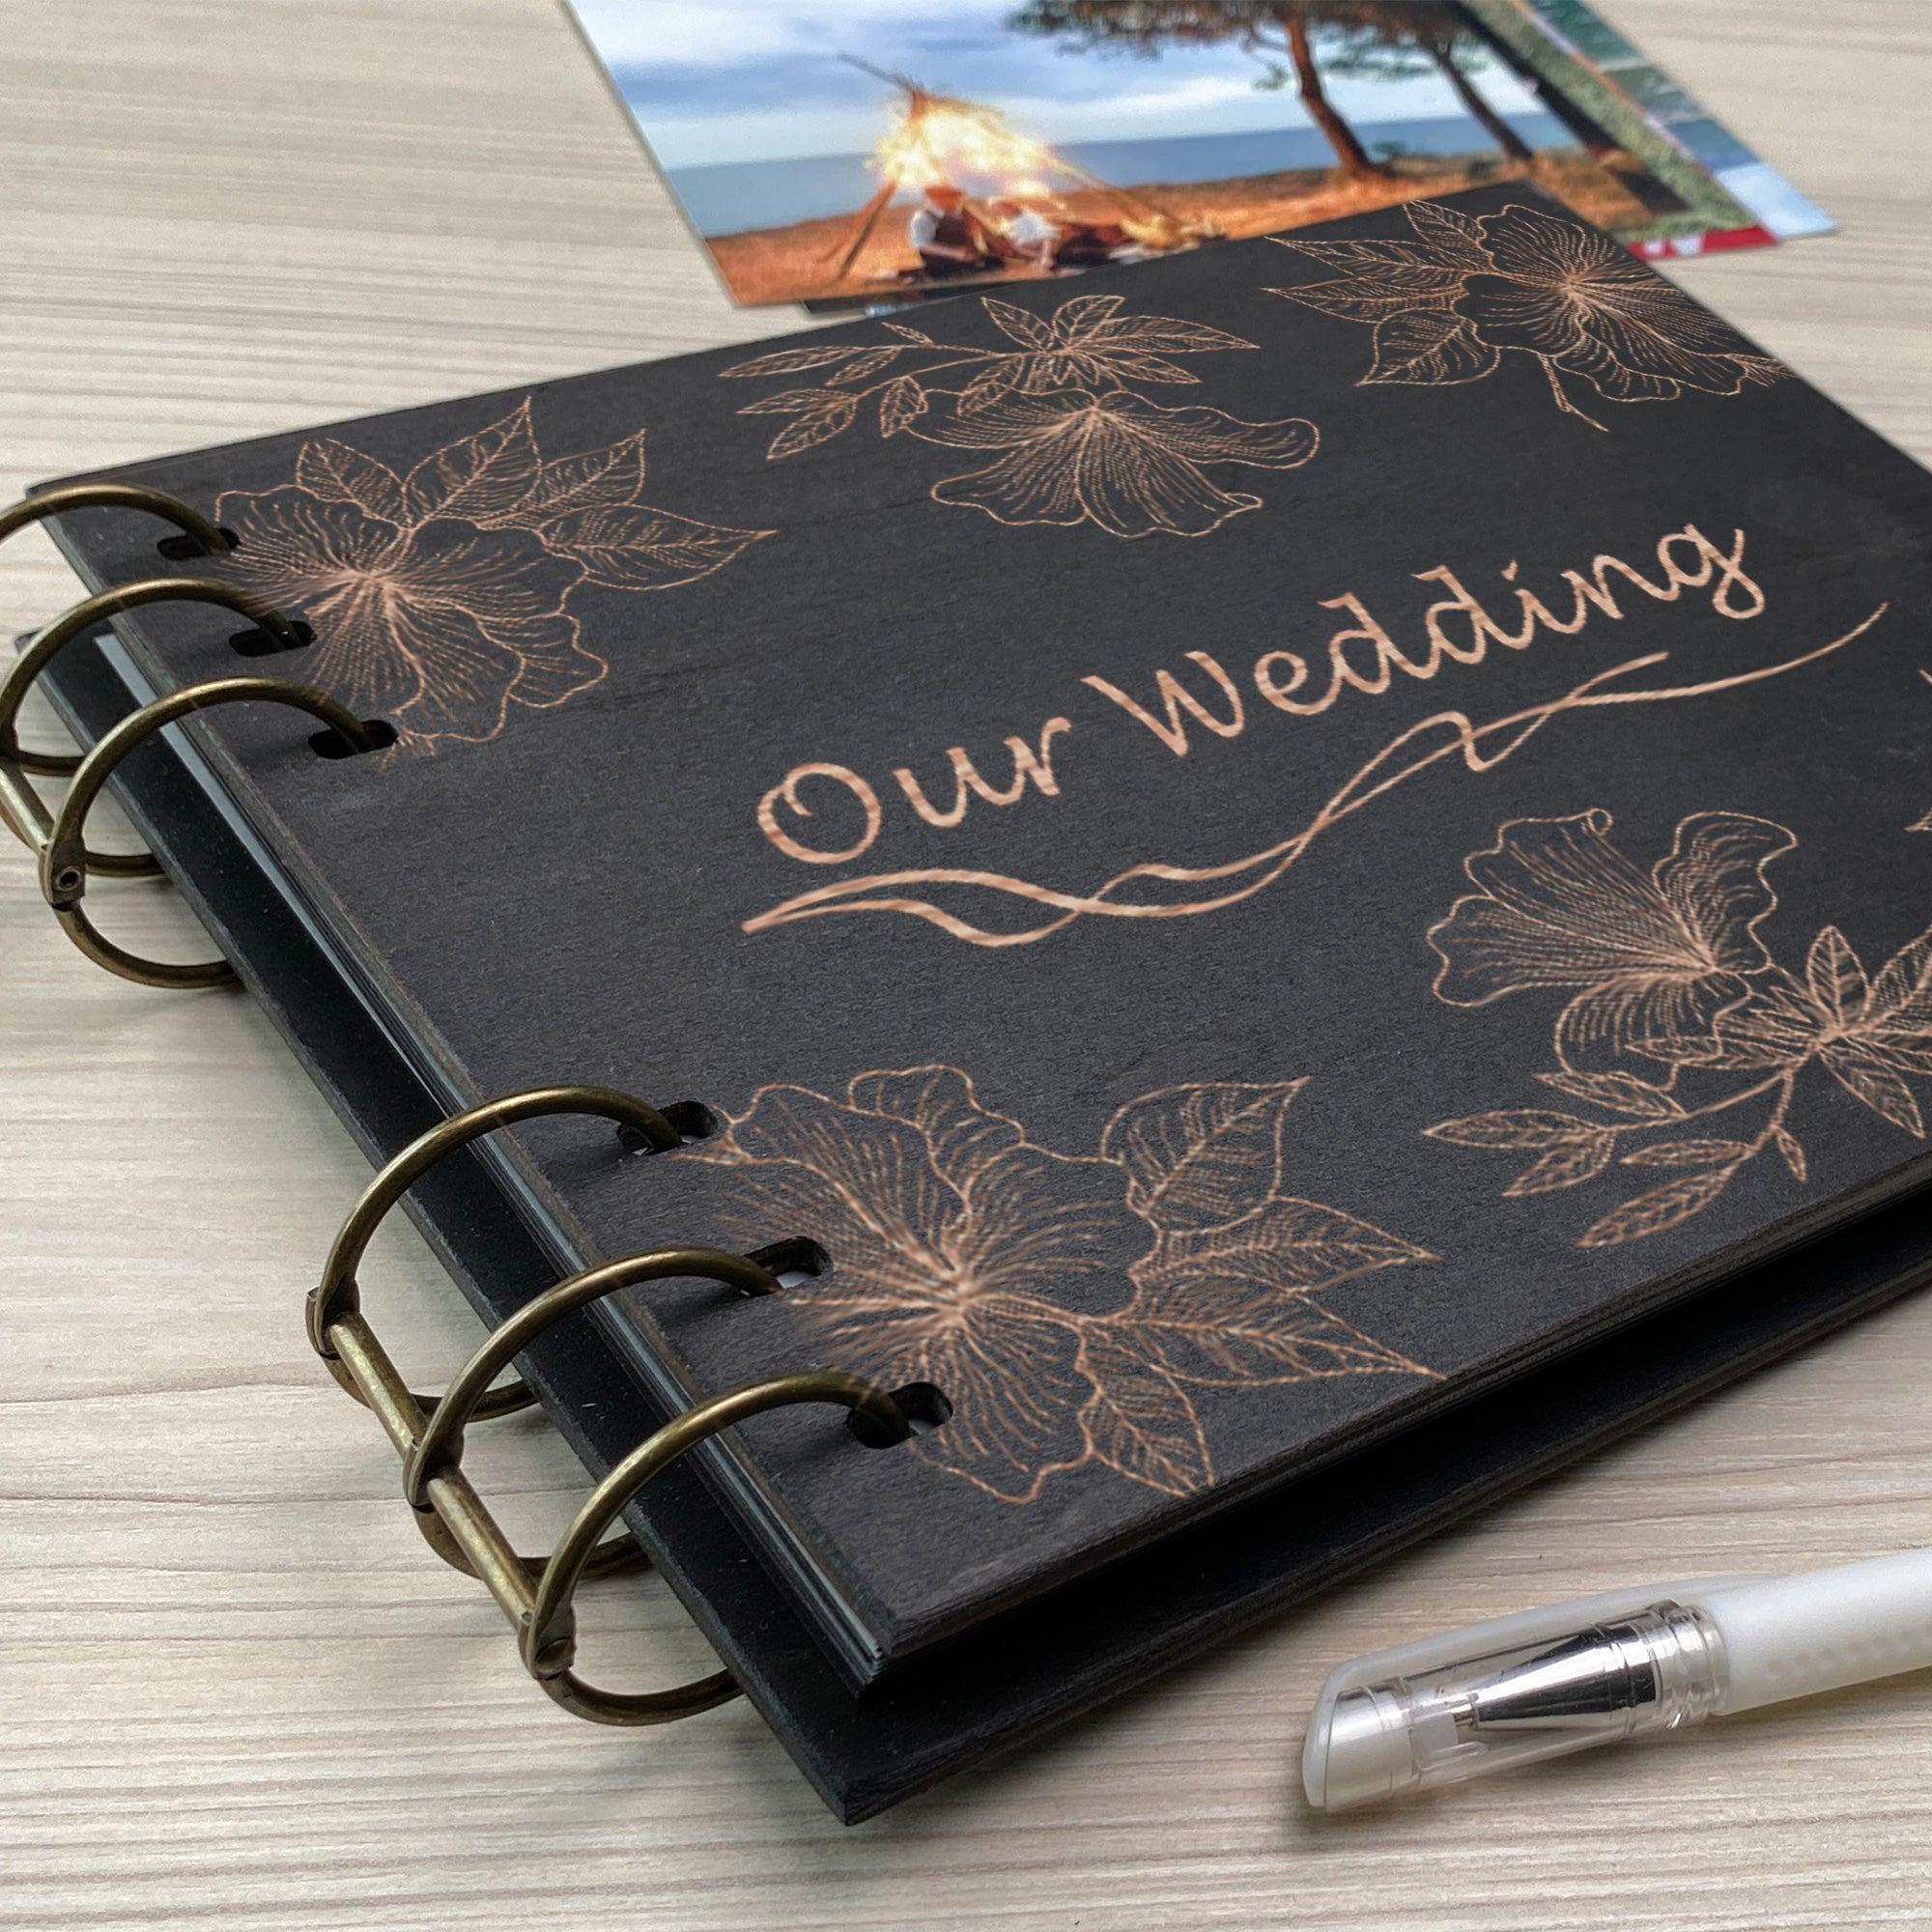 Personalized photo album cover and Magnolias map engraving